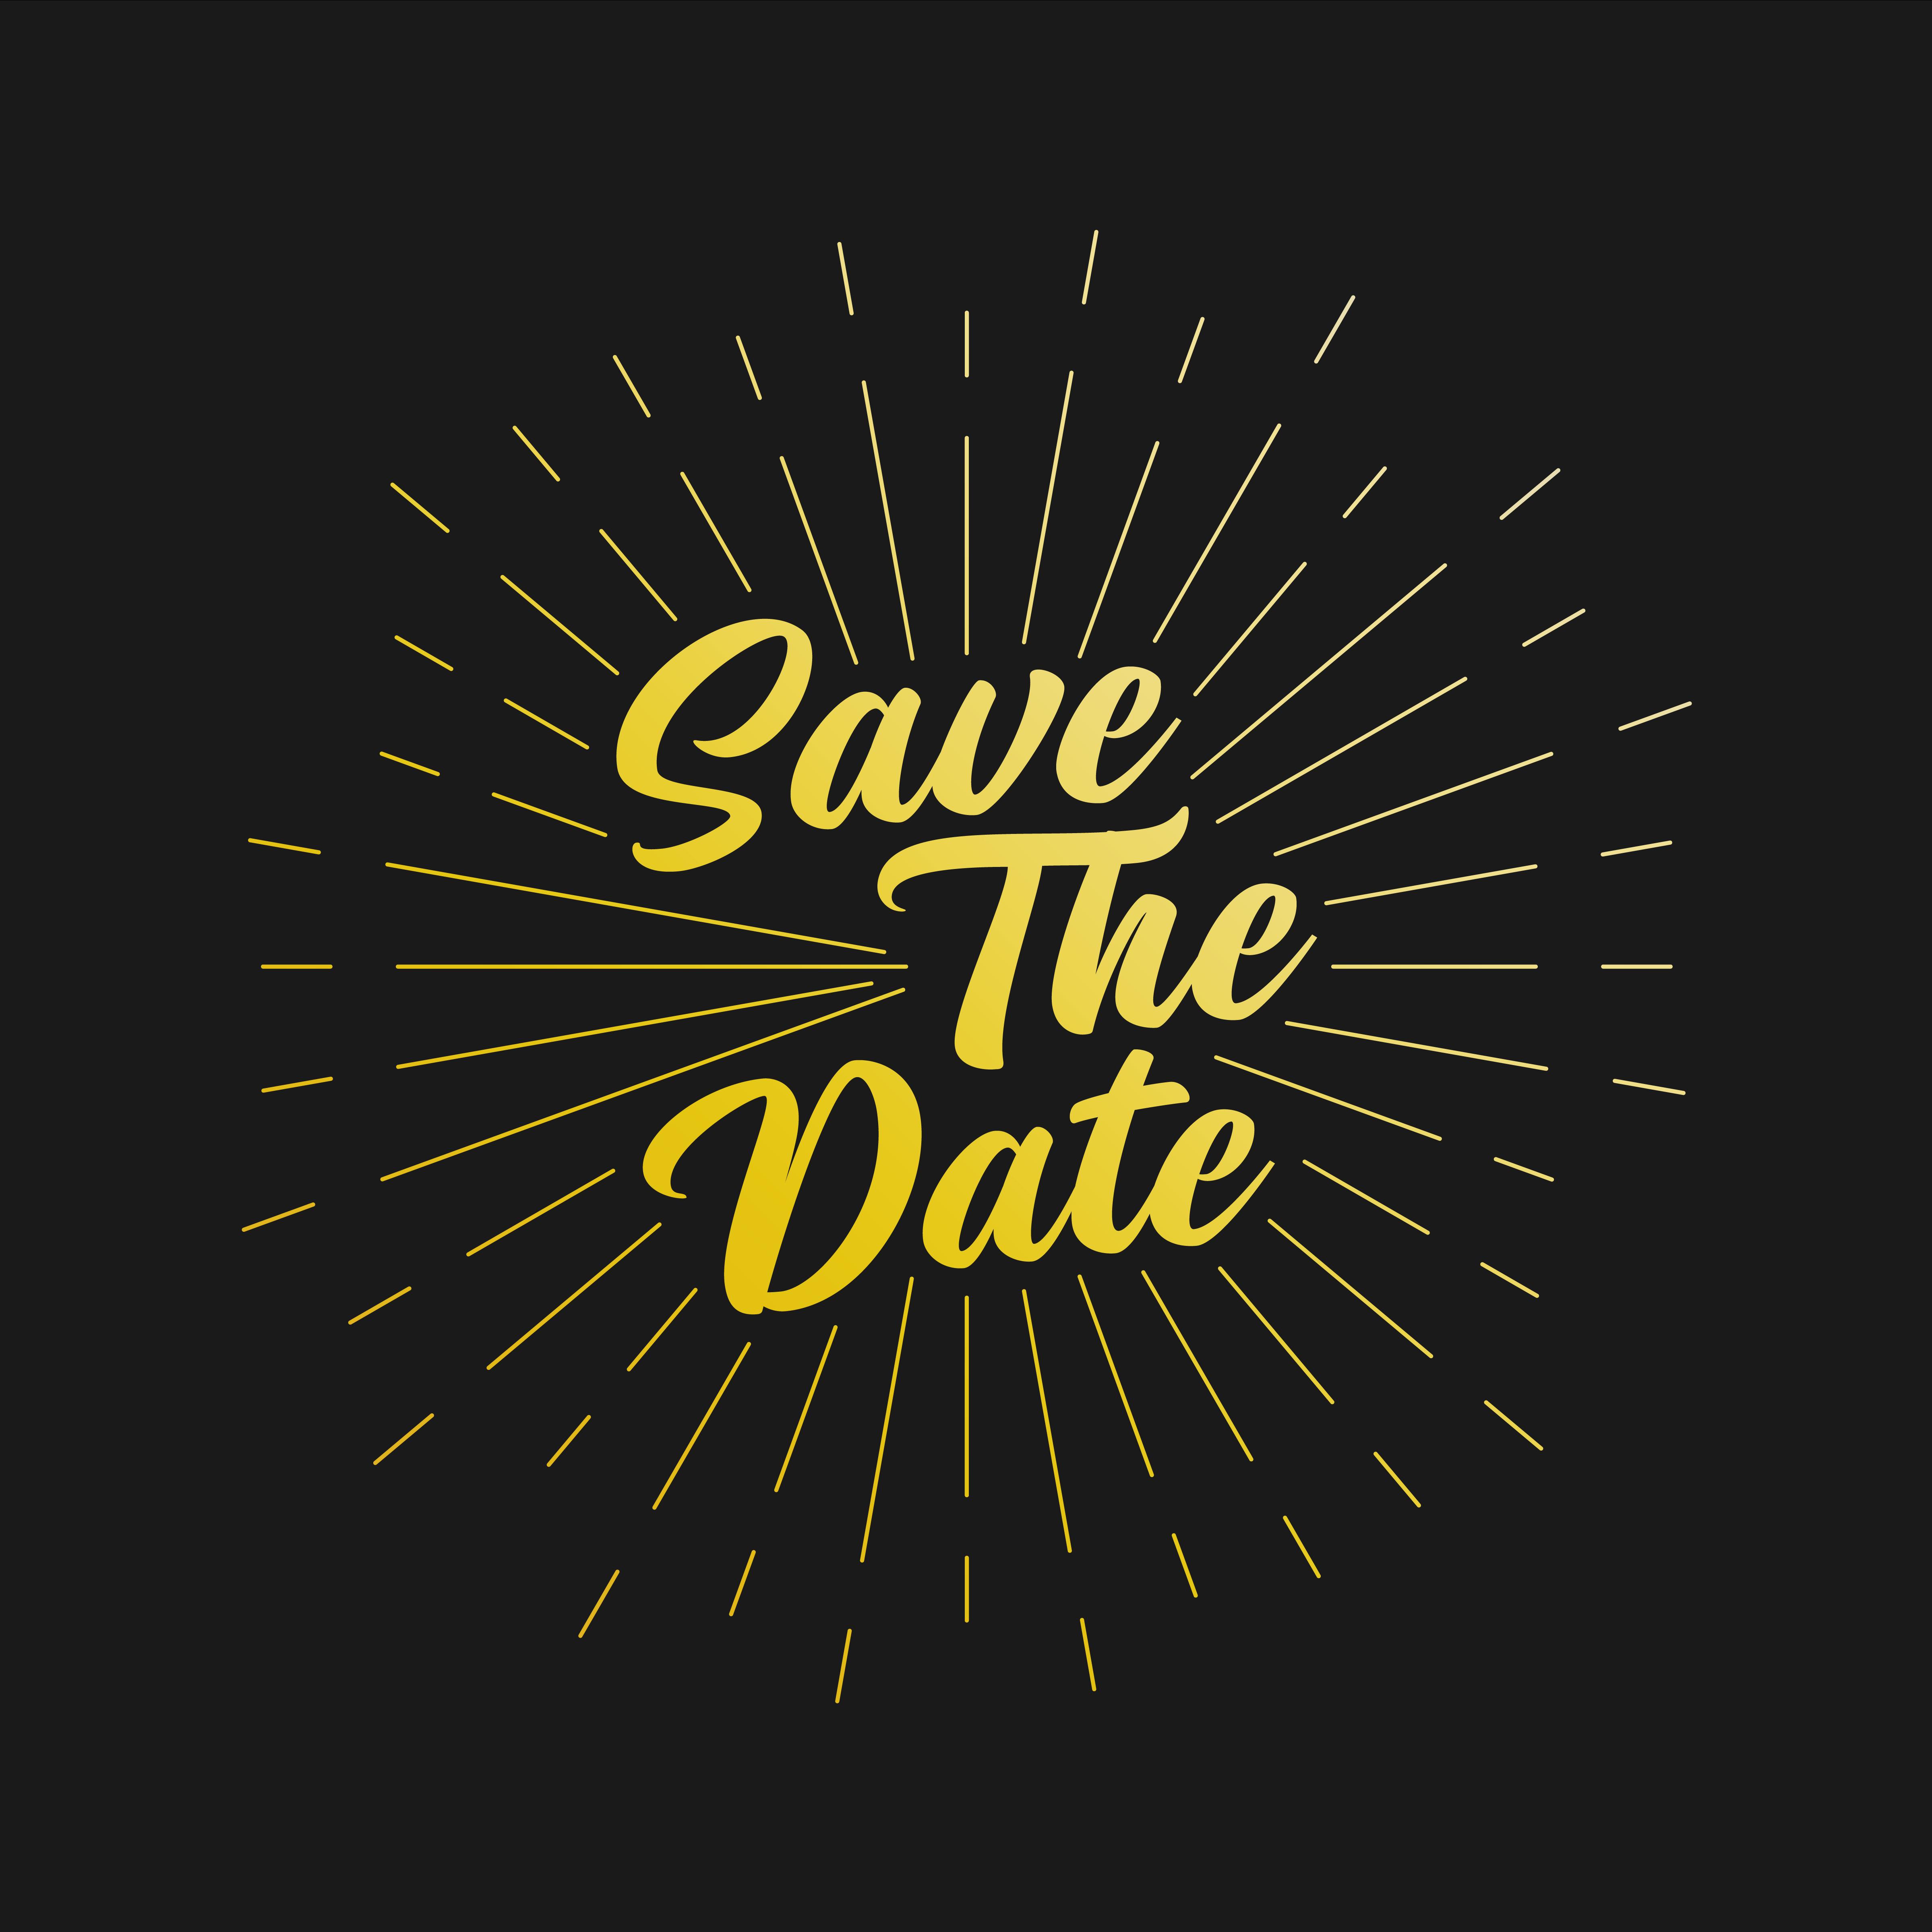 Save the Date text in bright yellow font with rays extending in all directions against a black background